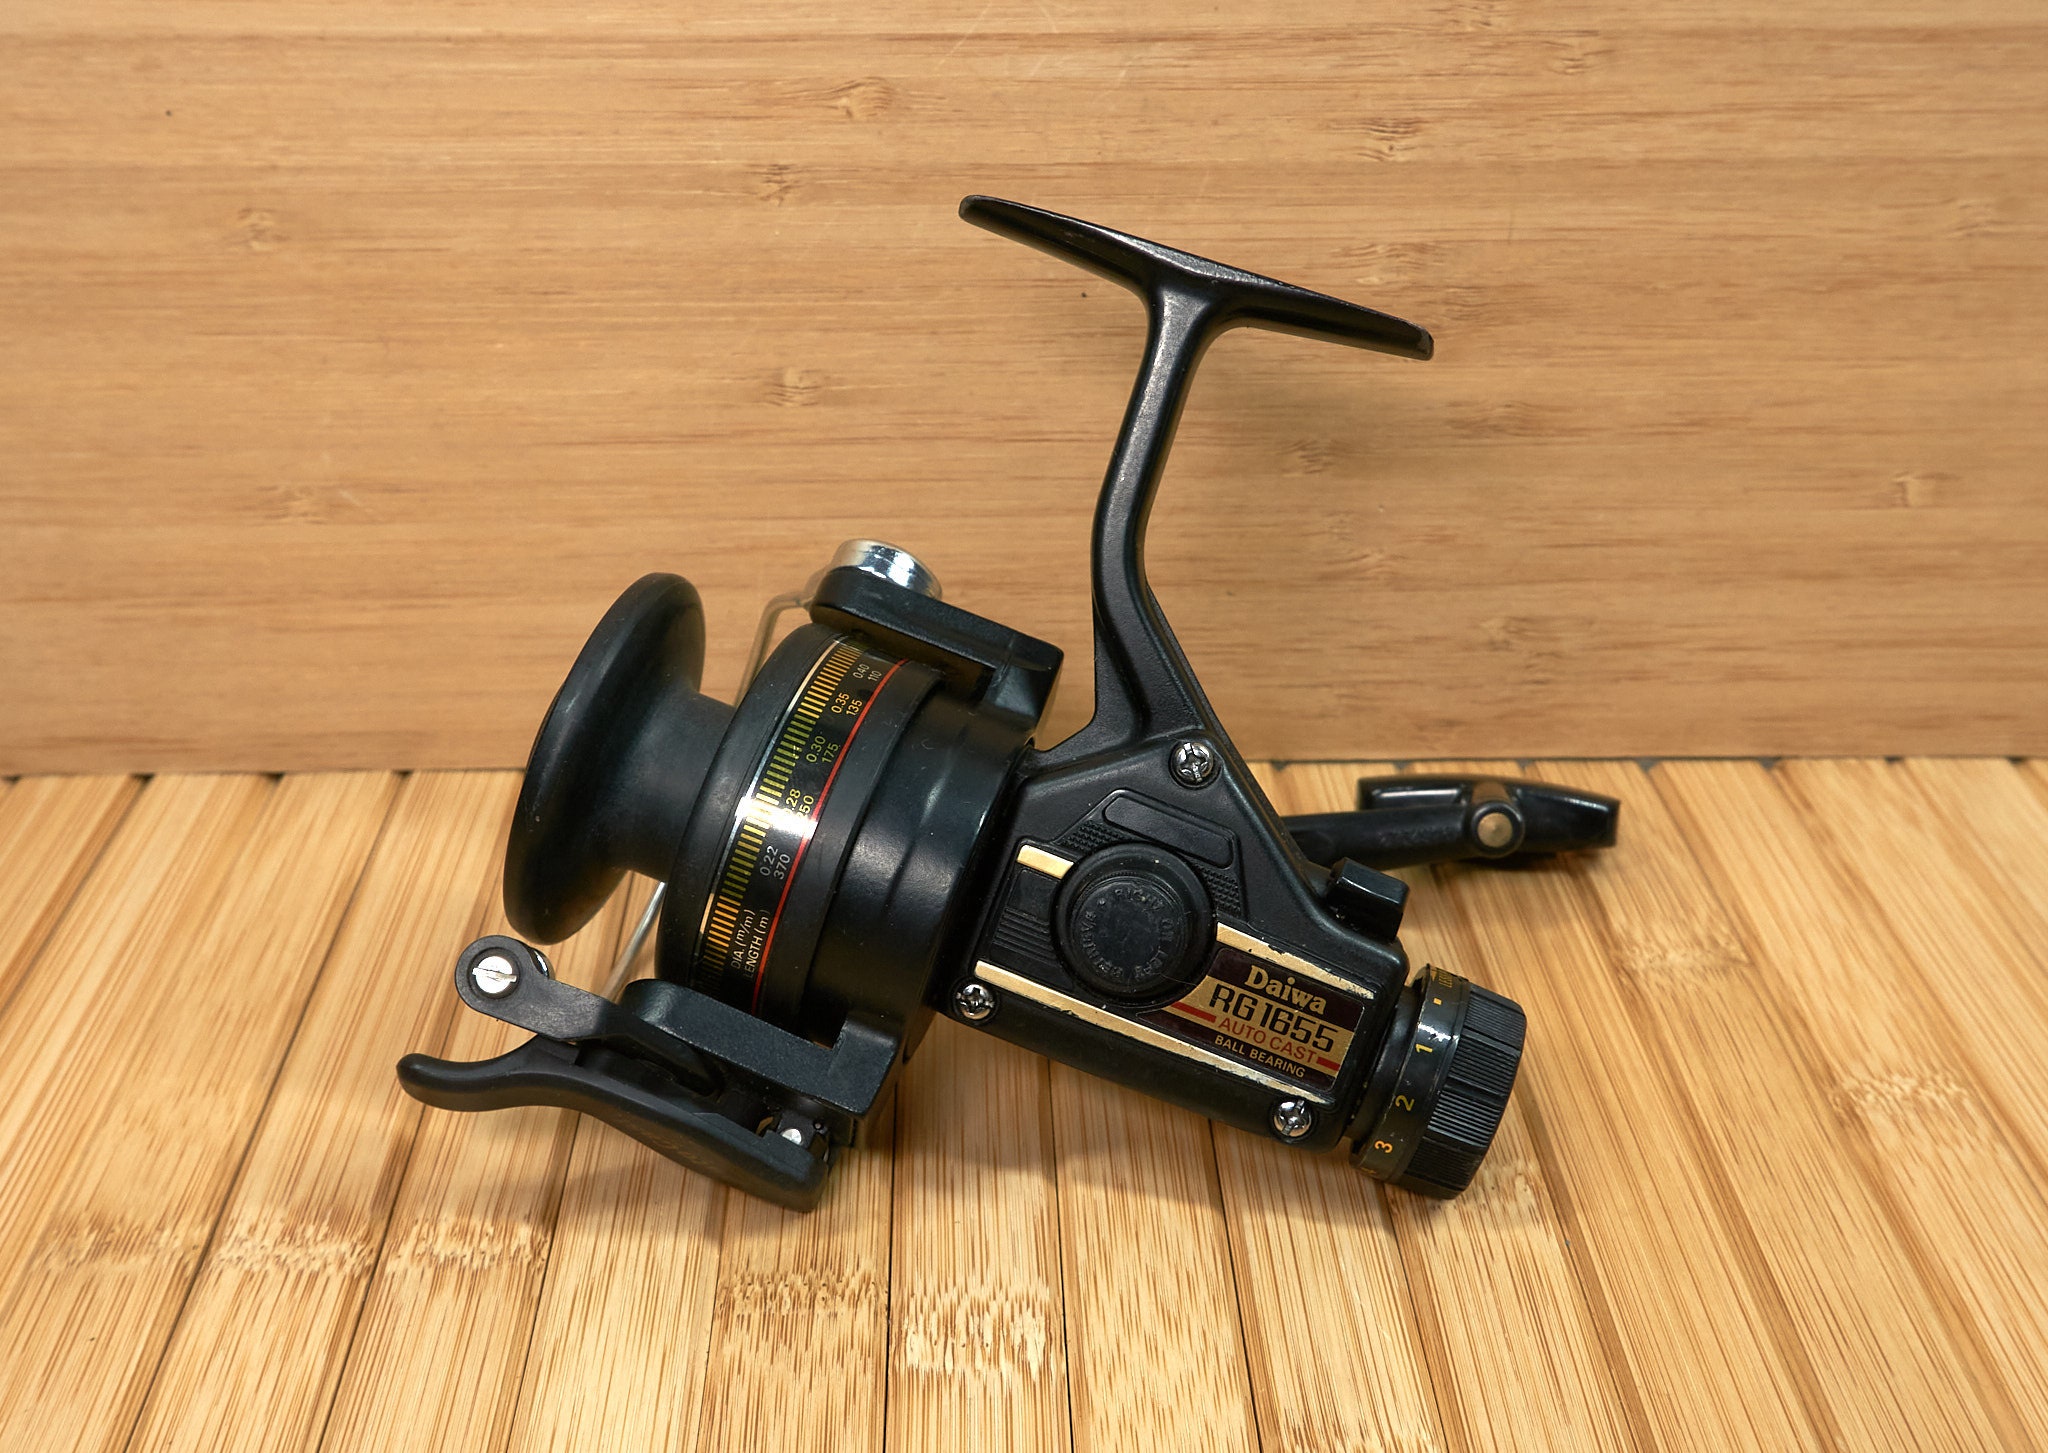 Vintage DAIWA RG 1655 Auto Cast Spinning Fishing Reel, Made in